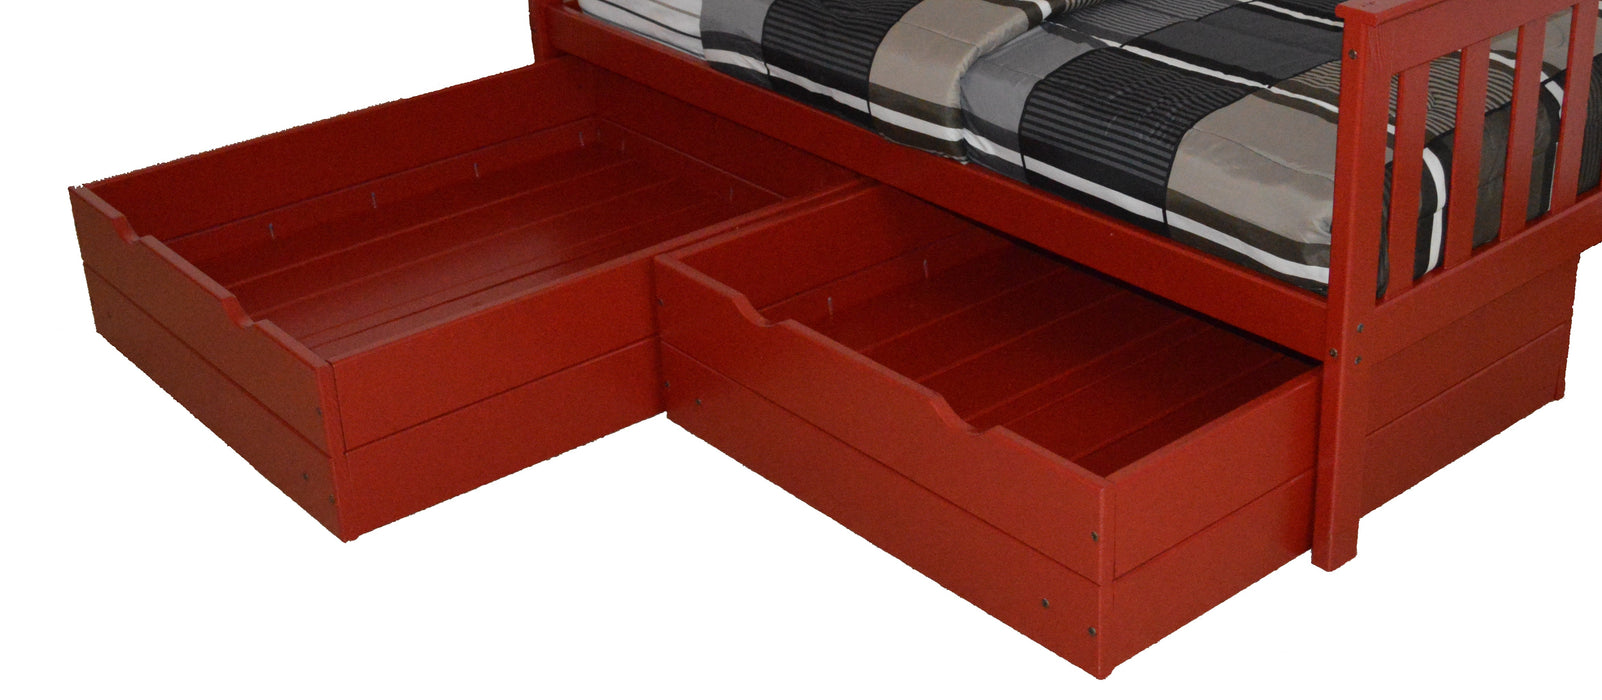 VersaLoft 2 Piece Twin Bed Drawers by A&L Furniture Company